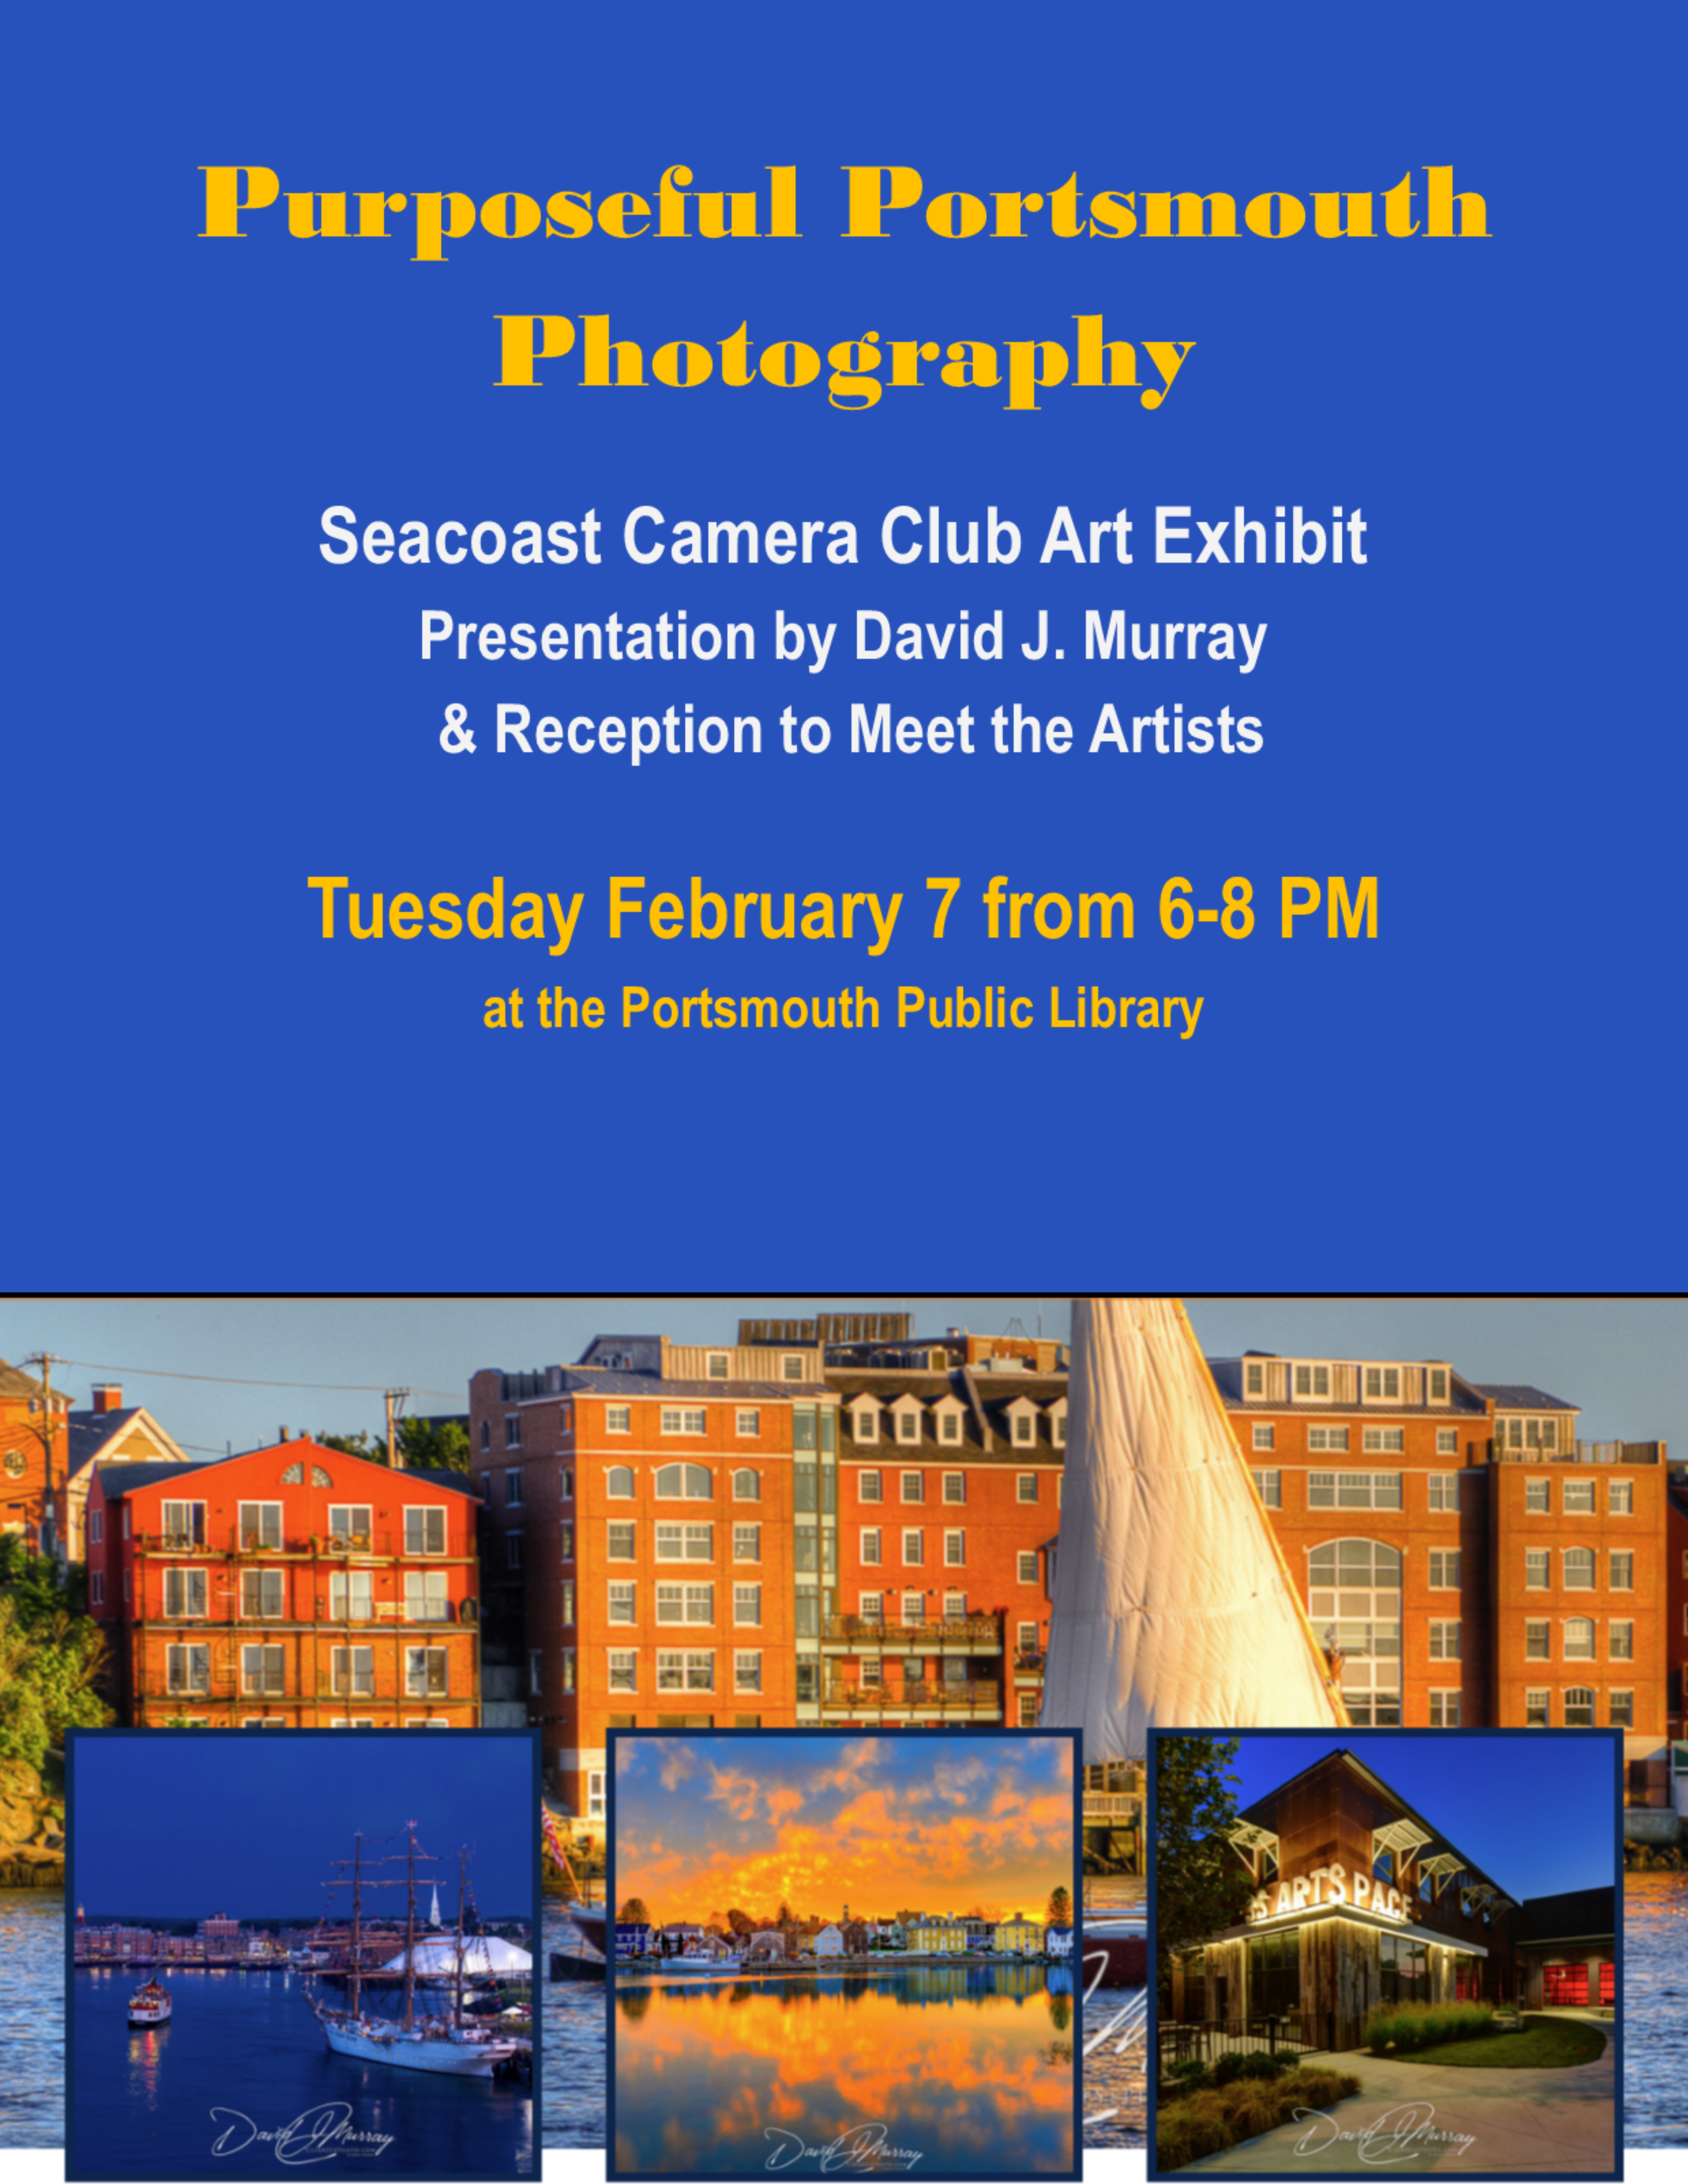 Purposeful Portsmouth Photography Exhibit reception and presentation by David J. Murray Tuesday February 7 from 6-8 PM at the Portsmouth Public Library